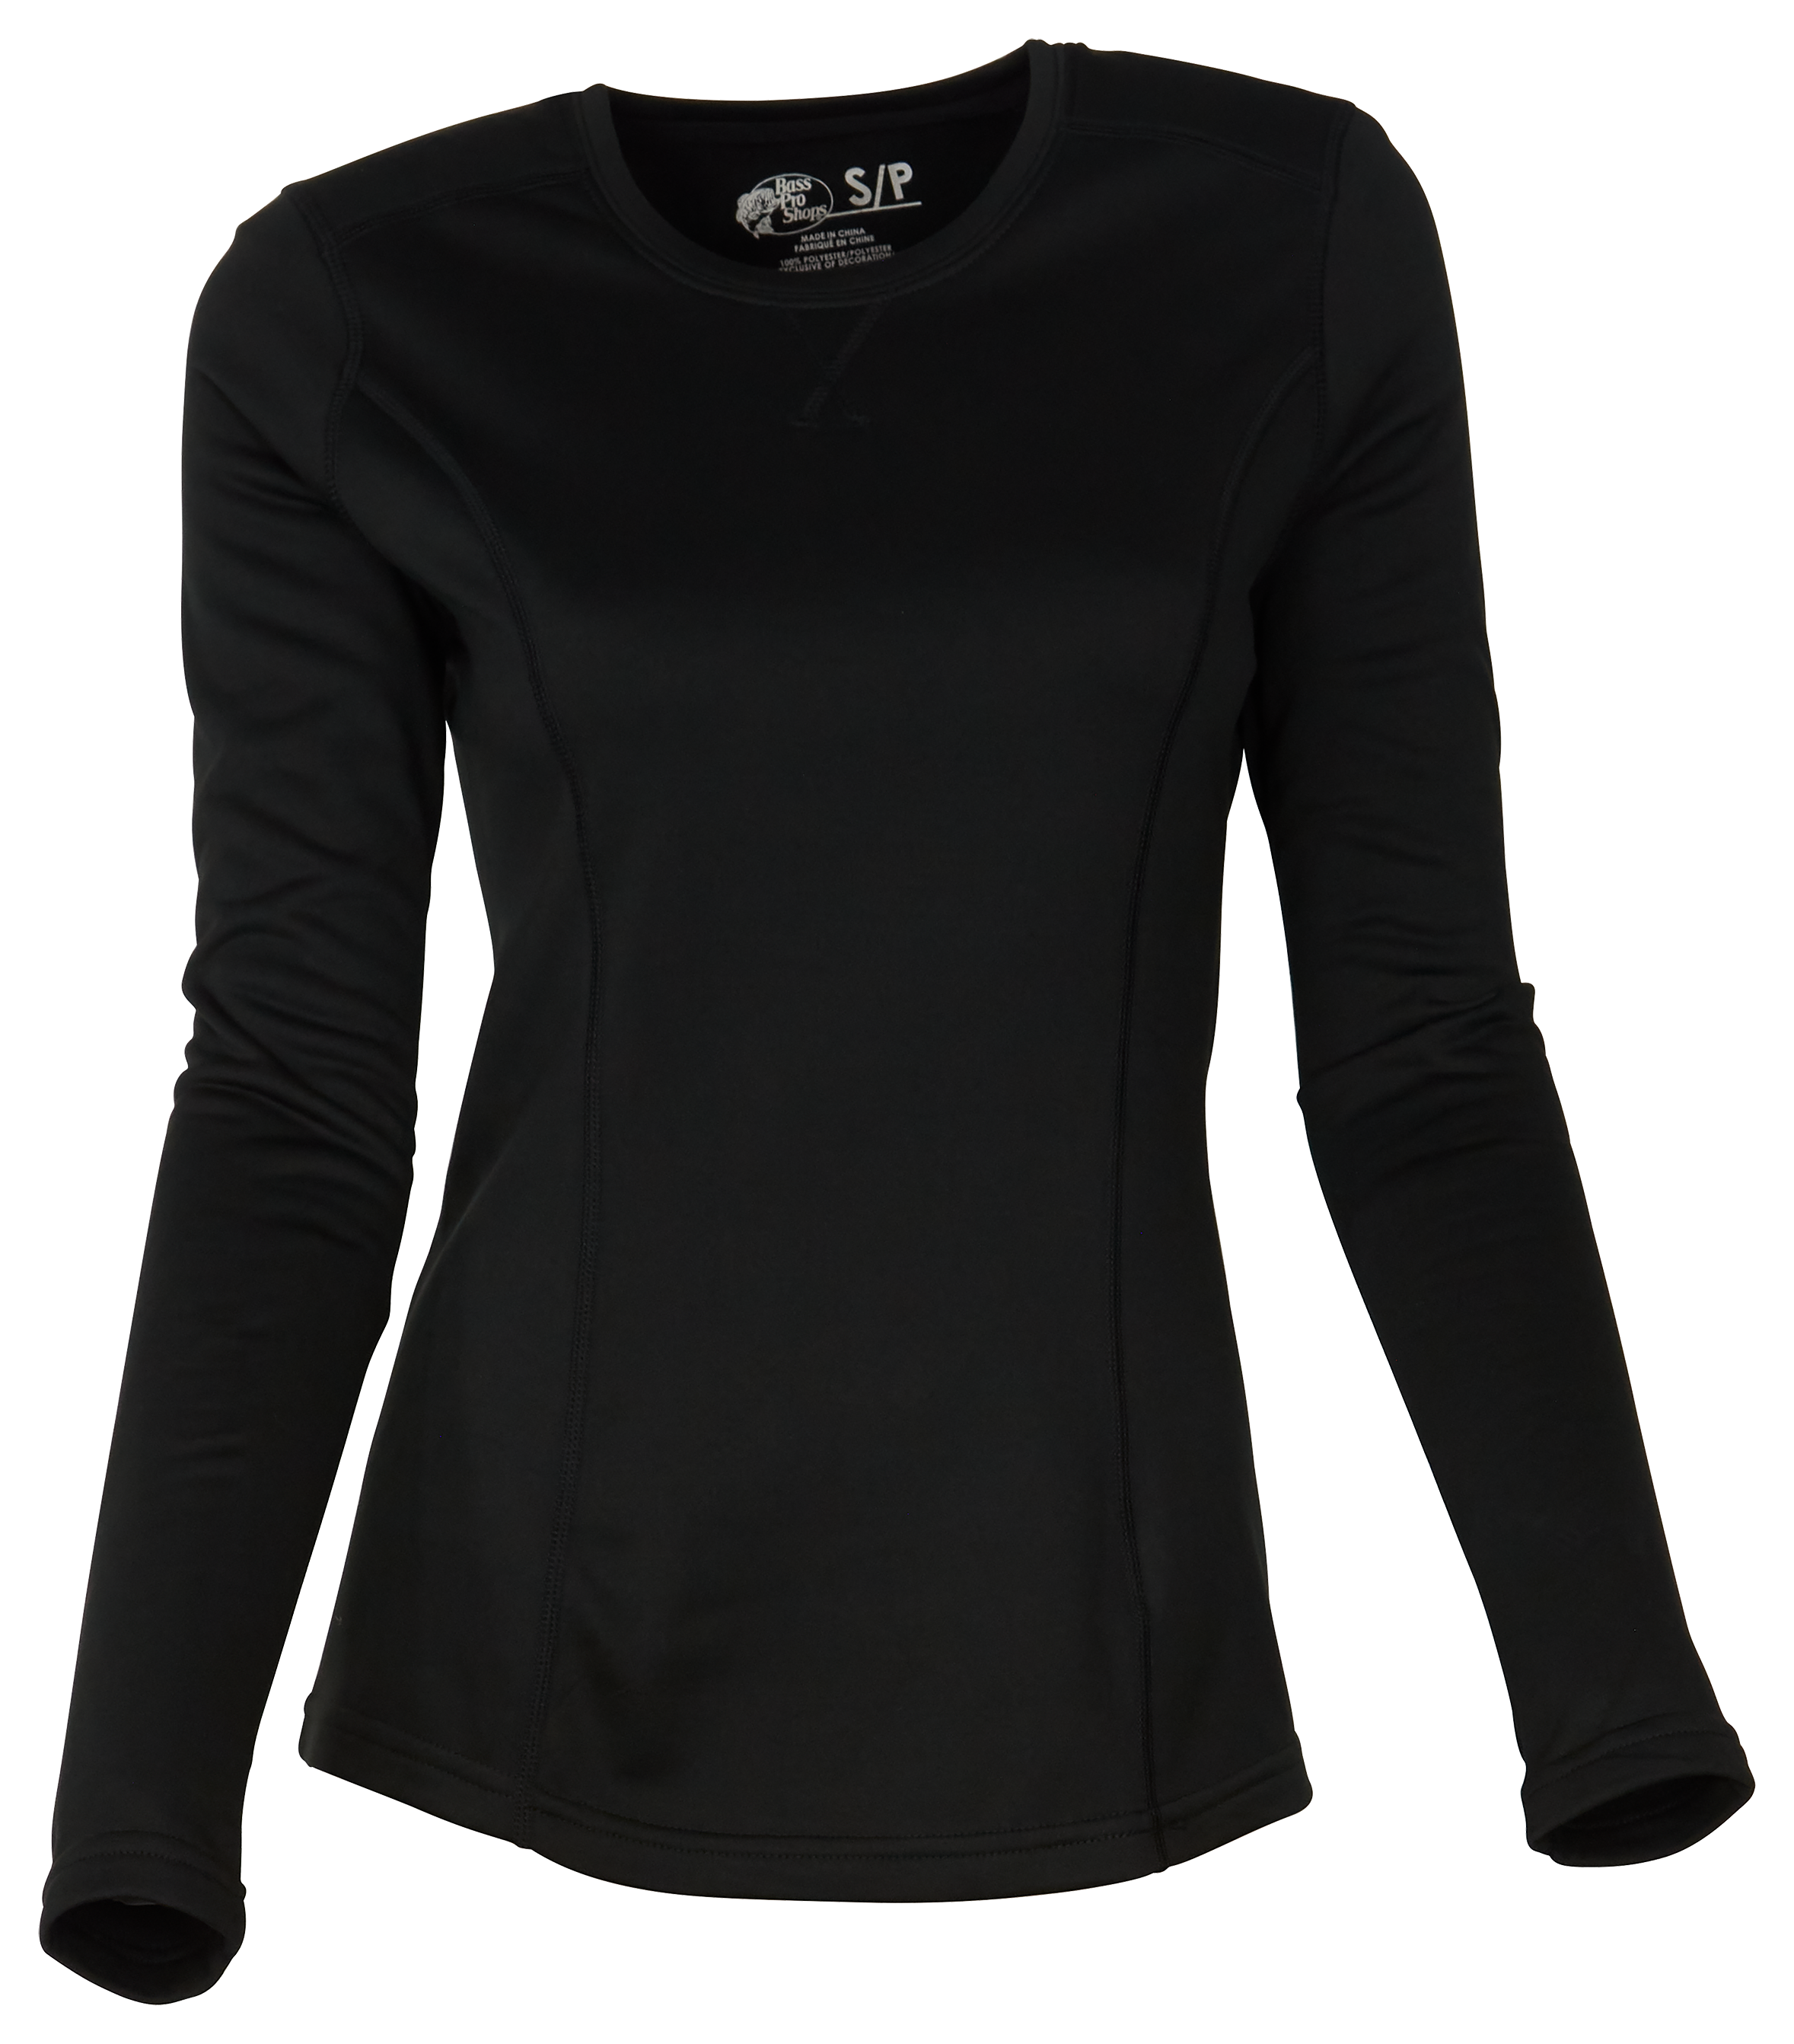 Bass Pro Shops Thermal Fleece Long-Sleeve Crew-Neck Top for Ladies - Black - XL